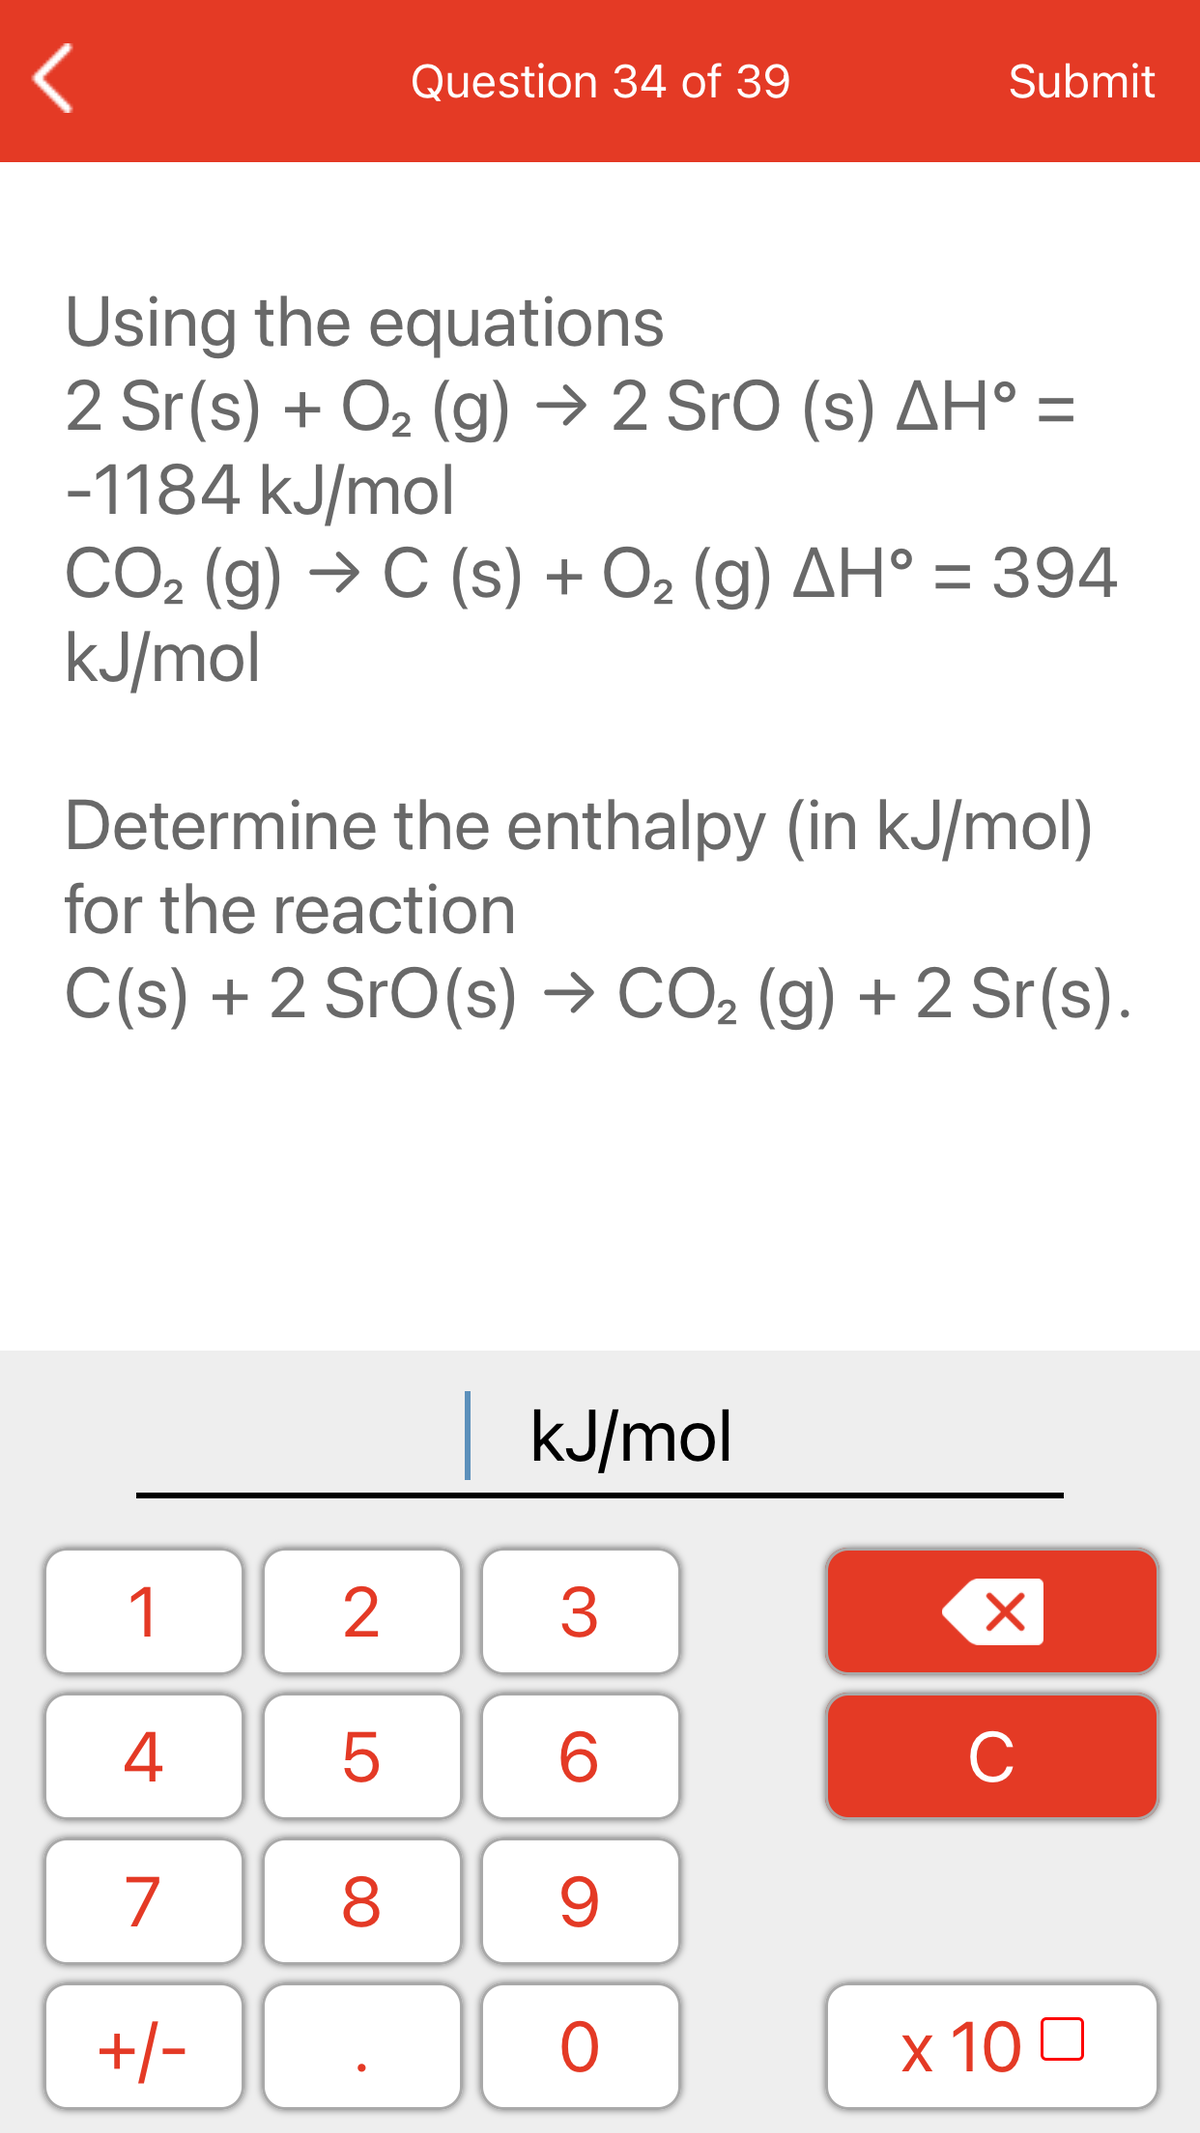 Question 34 of 39
Submit
Using the equations
2 Sr(s) + O2 (g) → 2 SrO (s) AH° =
-1184 kJ/mol
CO2 (g) → C (s) + O2 (g) AH° = 394
kJ/mol
Determine the enthalpy (in kJ/mol)
for the reaction
C(s) + 2 SrO(s) → CO2 (g) + 2 Sr(s).
kJ/mol
1
2
3
4
C
7
+/-
x 10 0
LO
00
